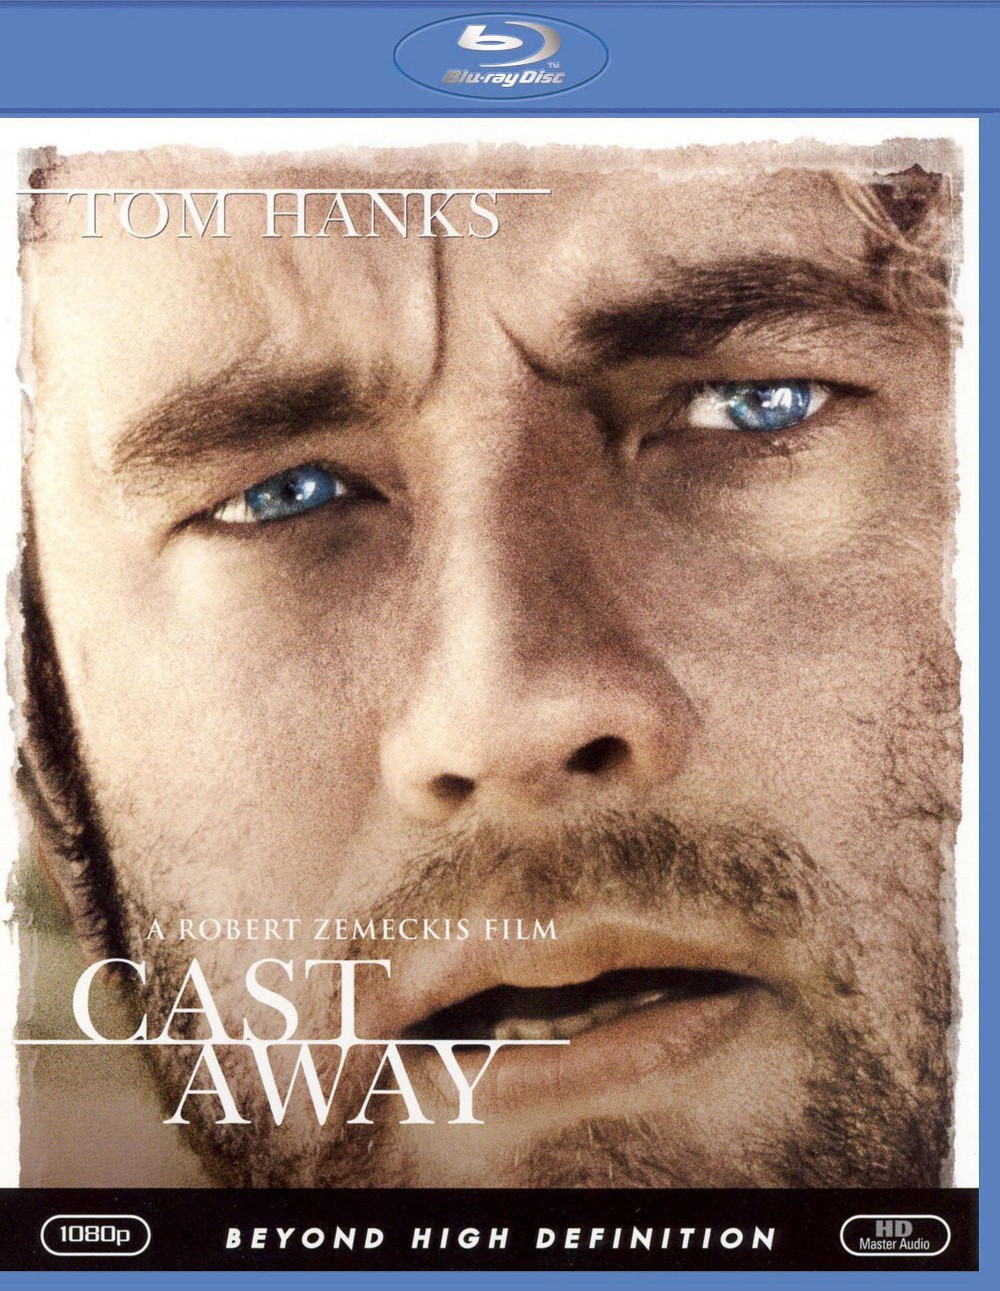 Cast Away (Blu-ray) Widescreen - image 2 of 3